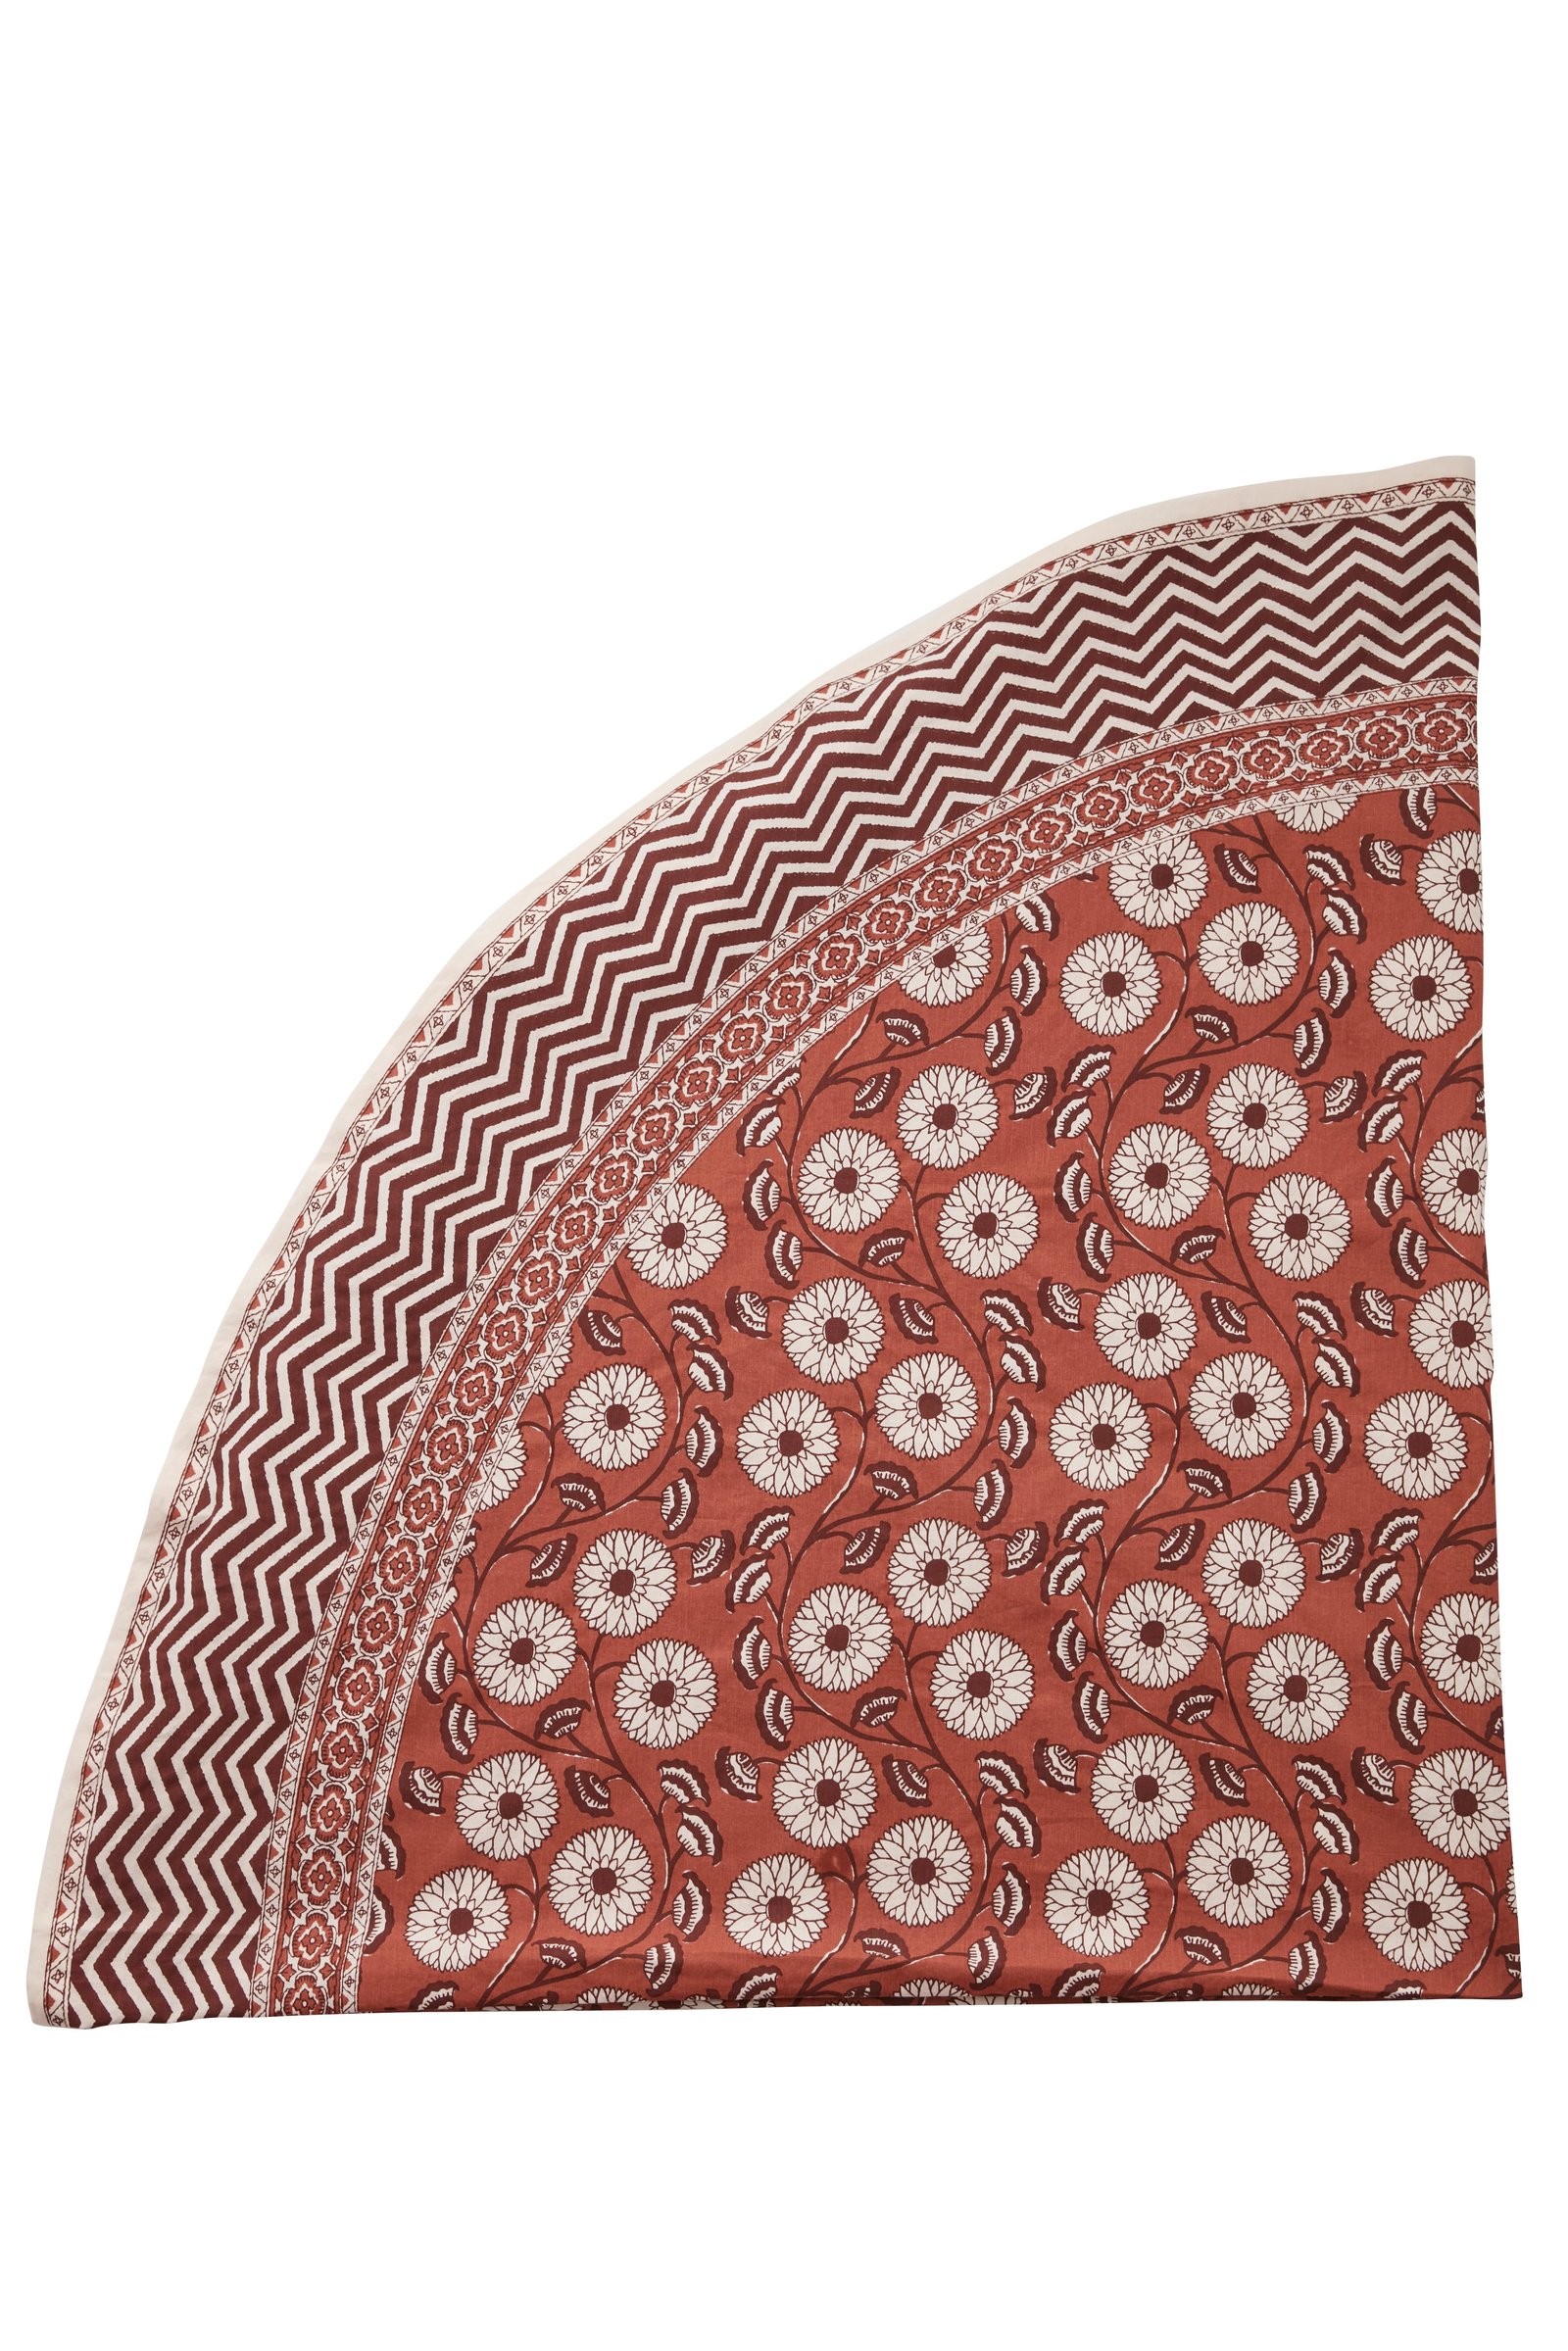 Patterned round tablecloth